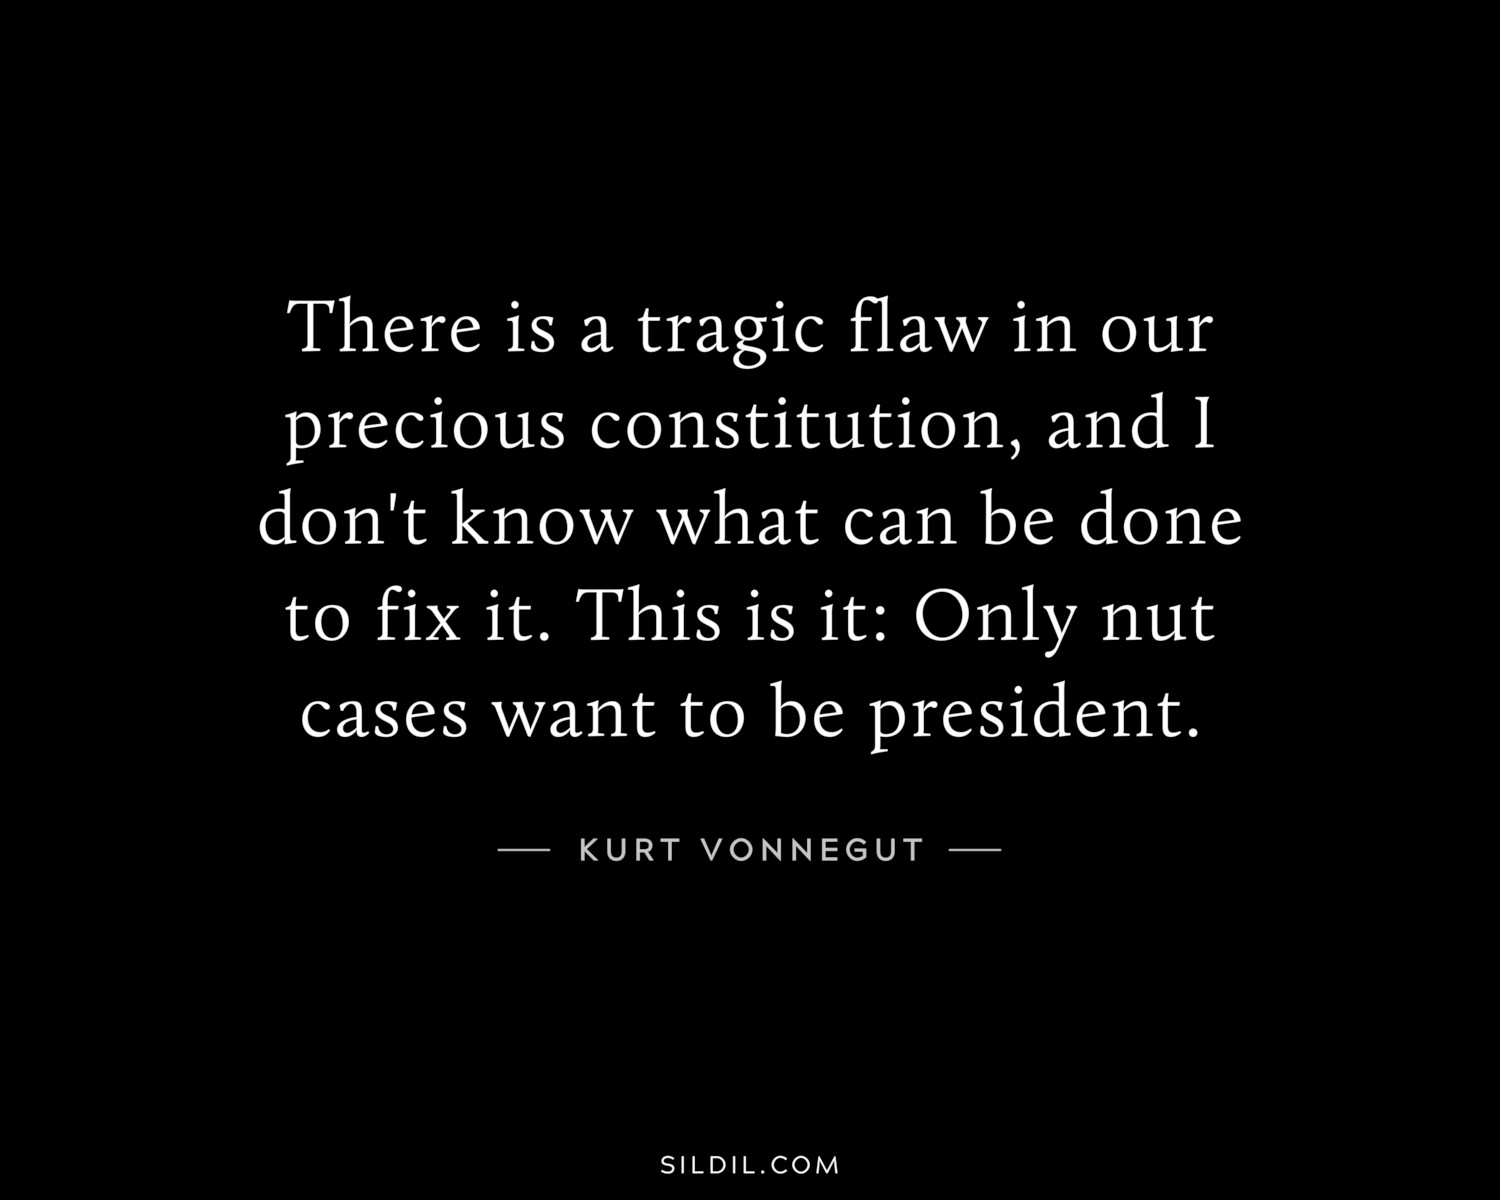 There is a tragic flaw in our precious constitution, and I don't know what can be done to fix it. This is it: Only nut cases want to be president.